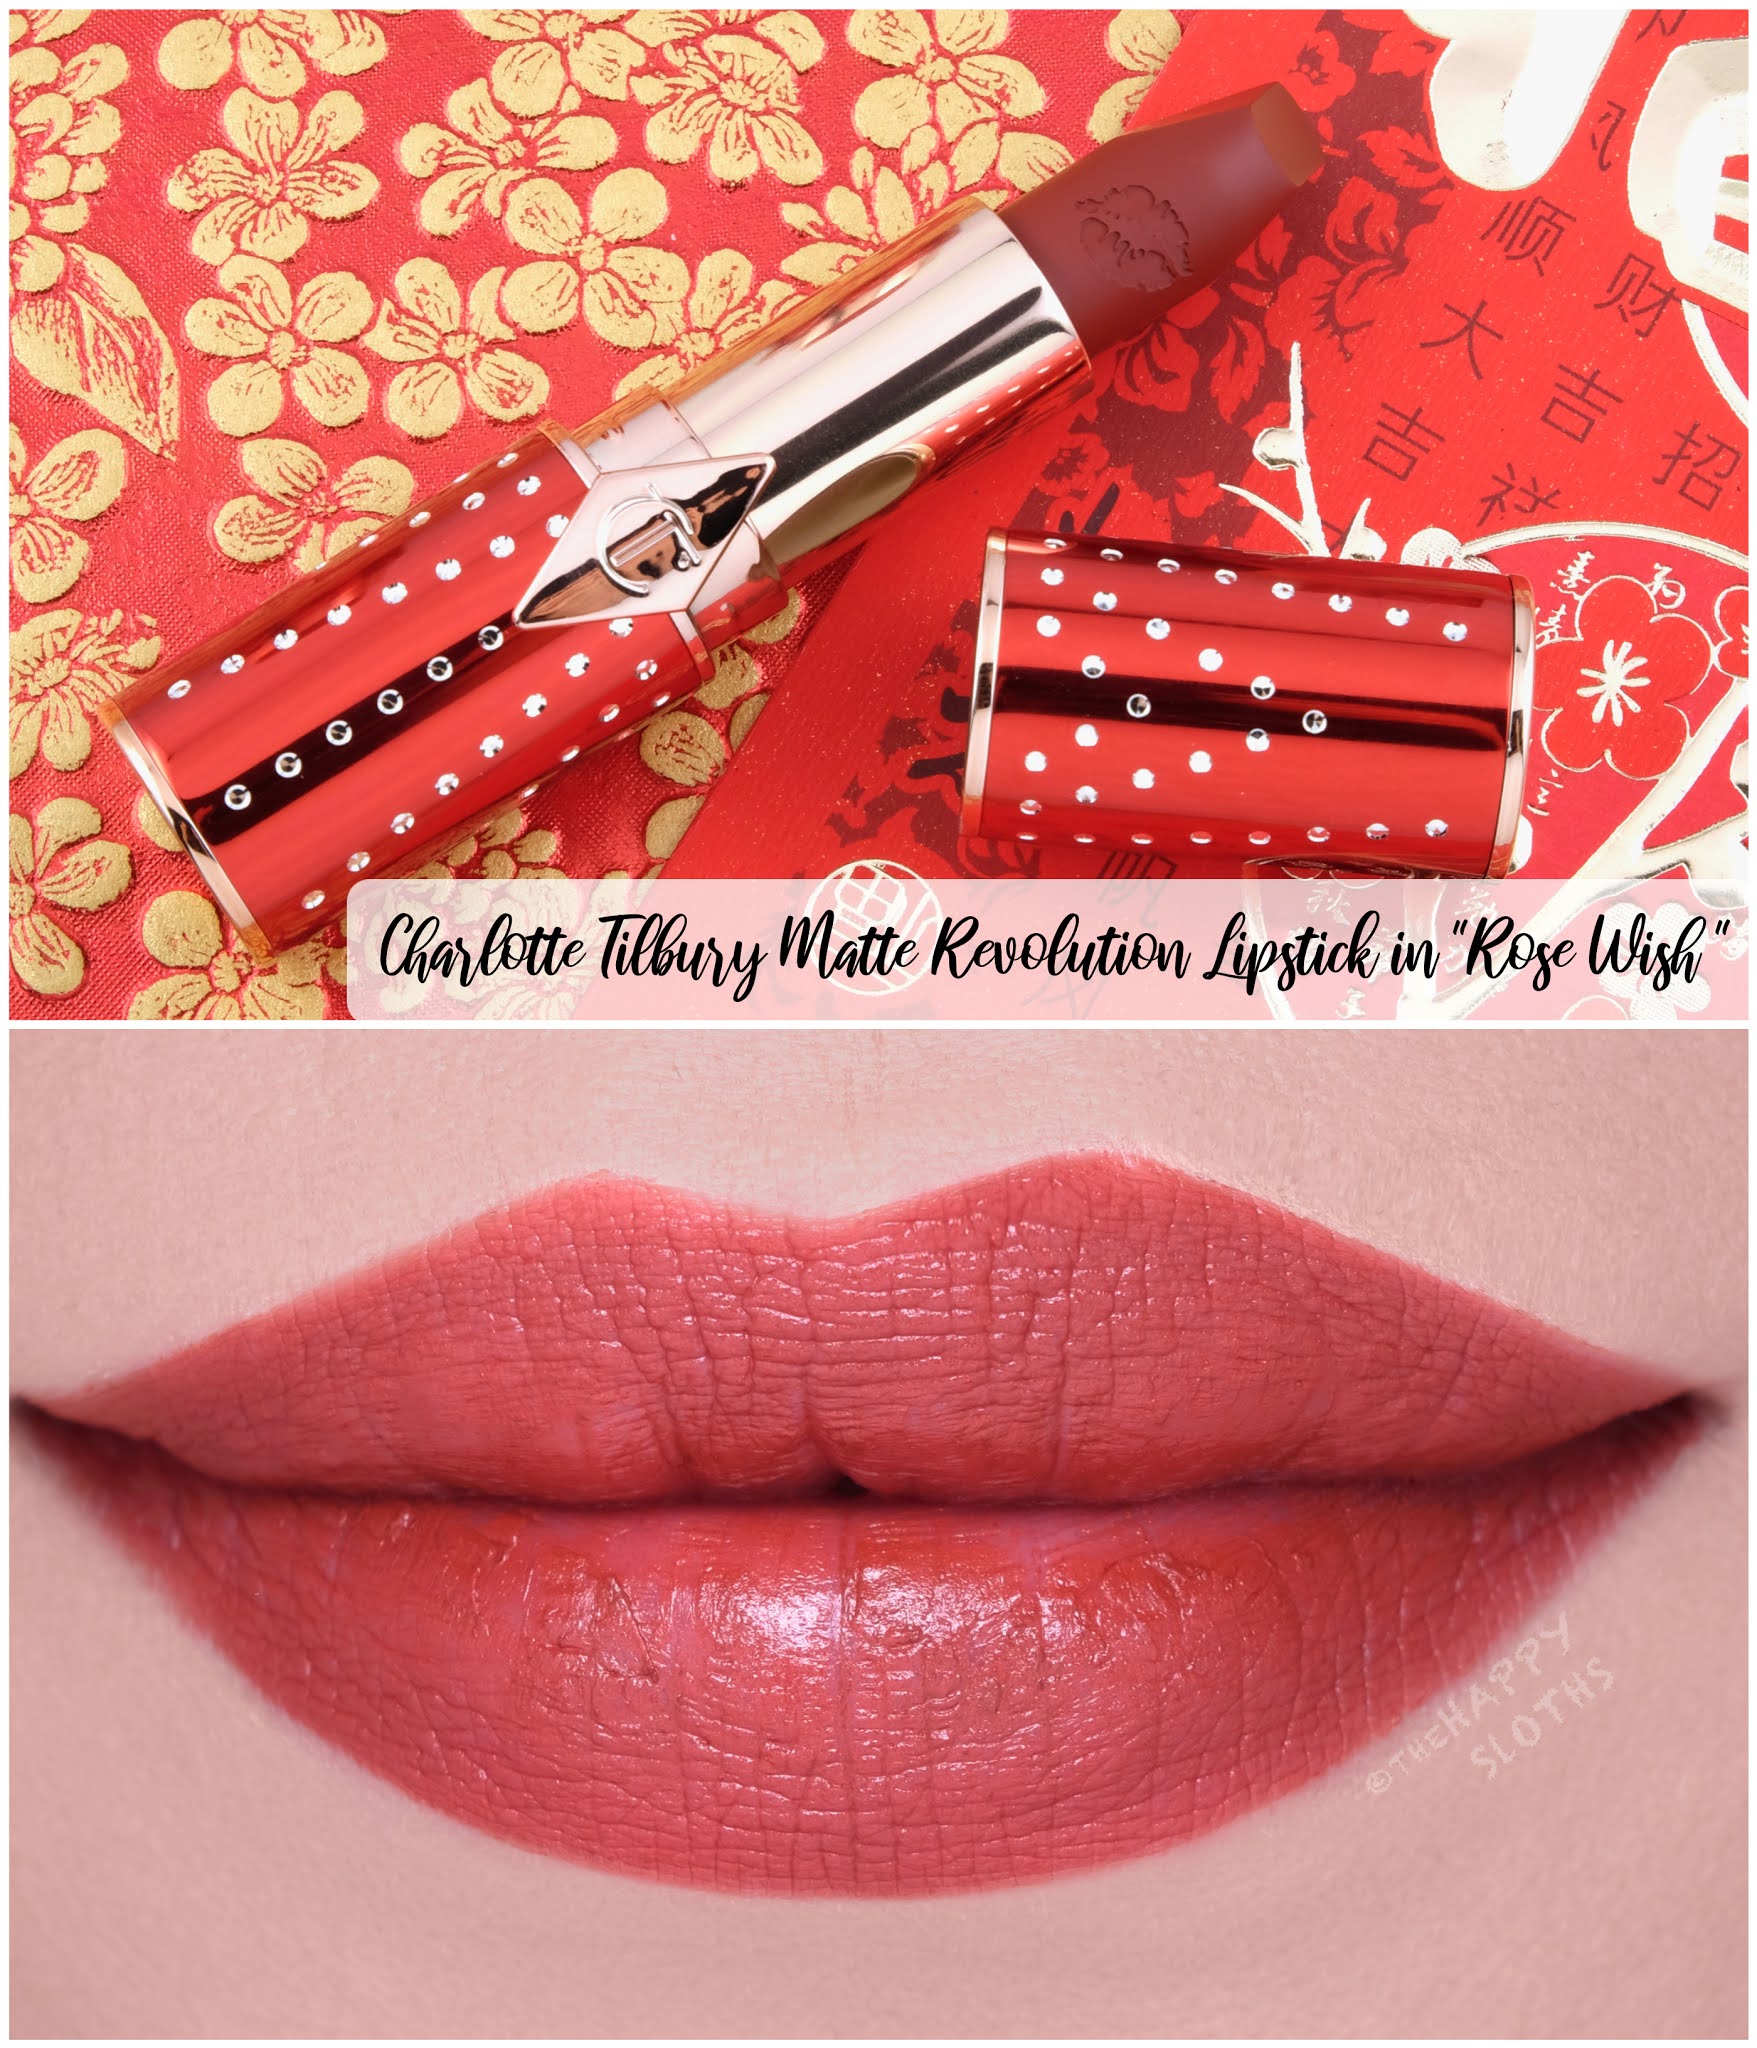 Charlotte Tilbury | Lunar New Year Matte Revolution Lipstick in "Rose Wish": Review and Swatches